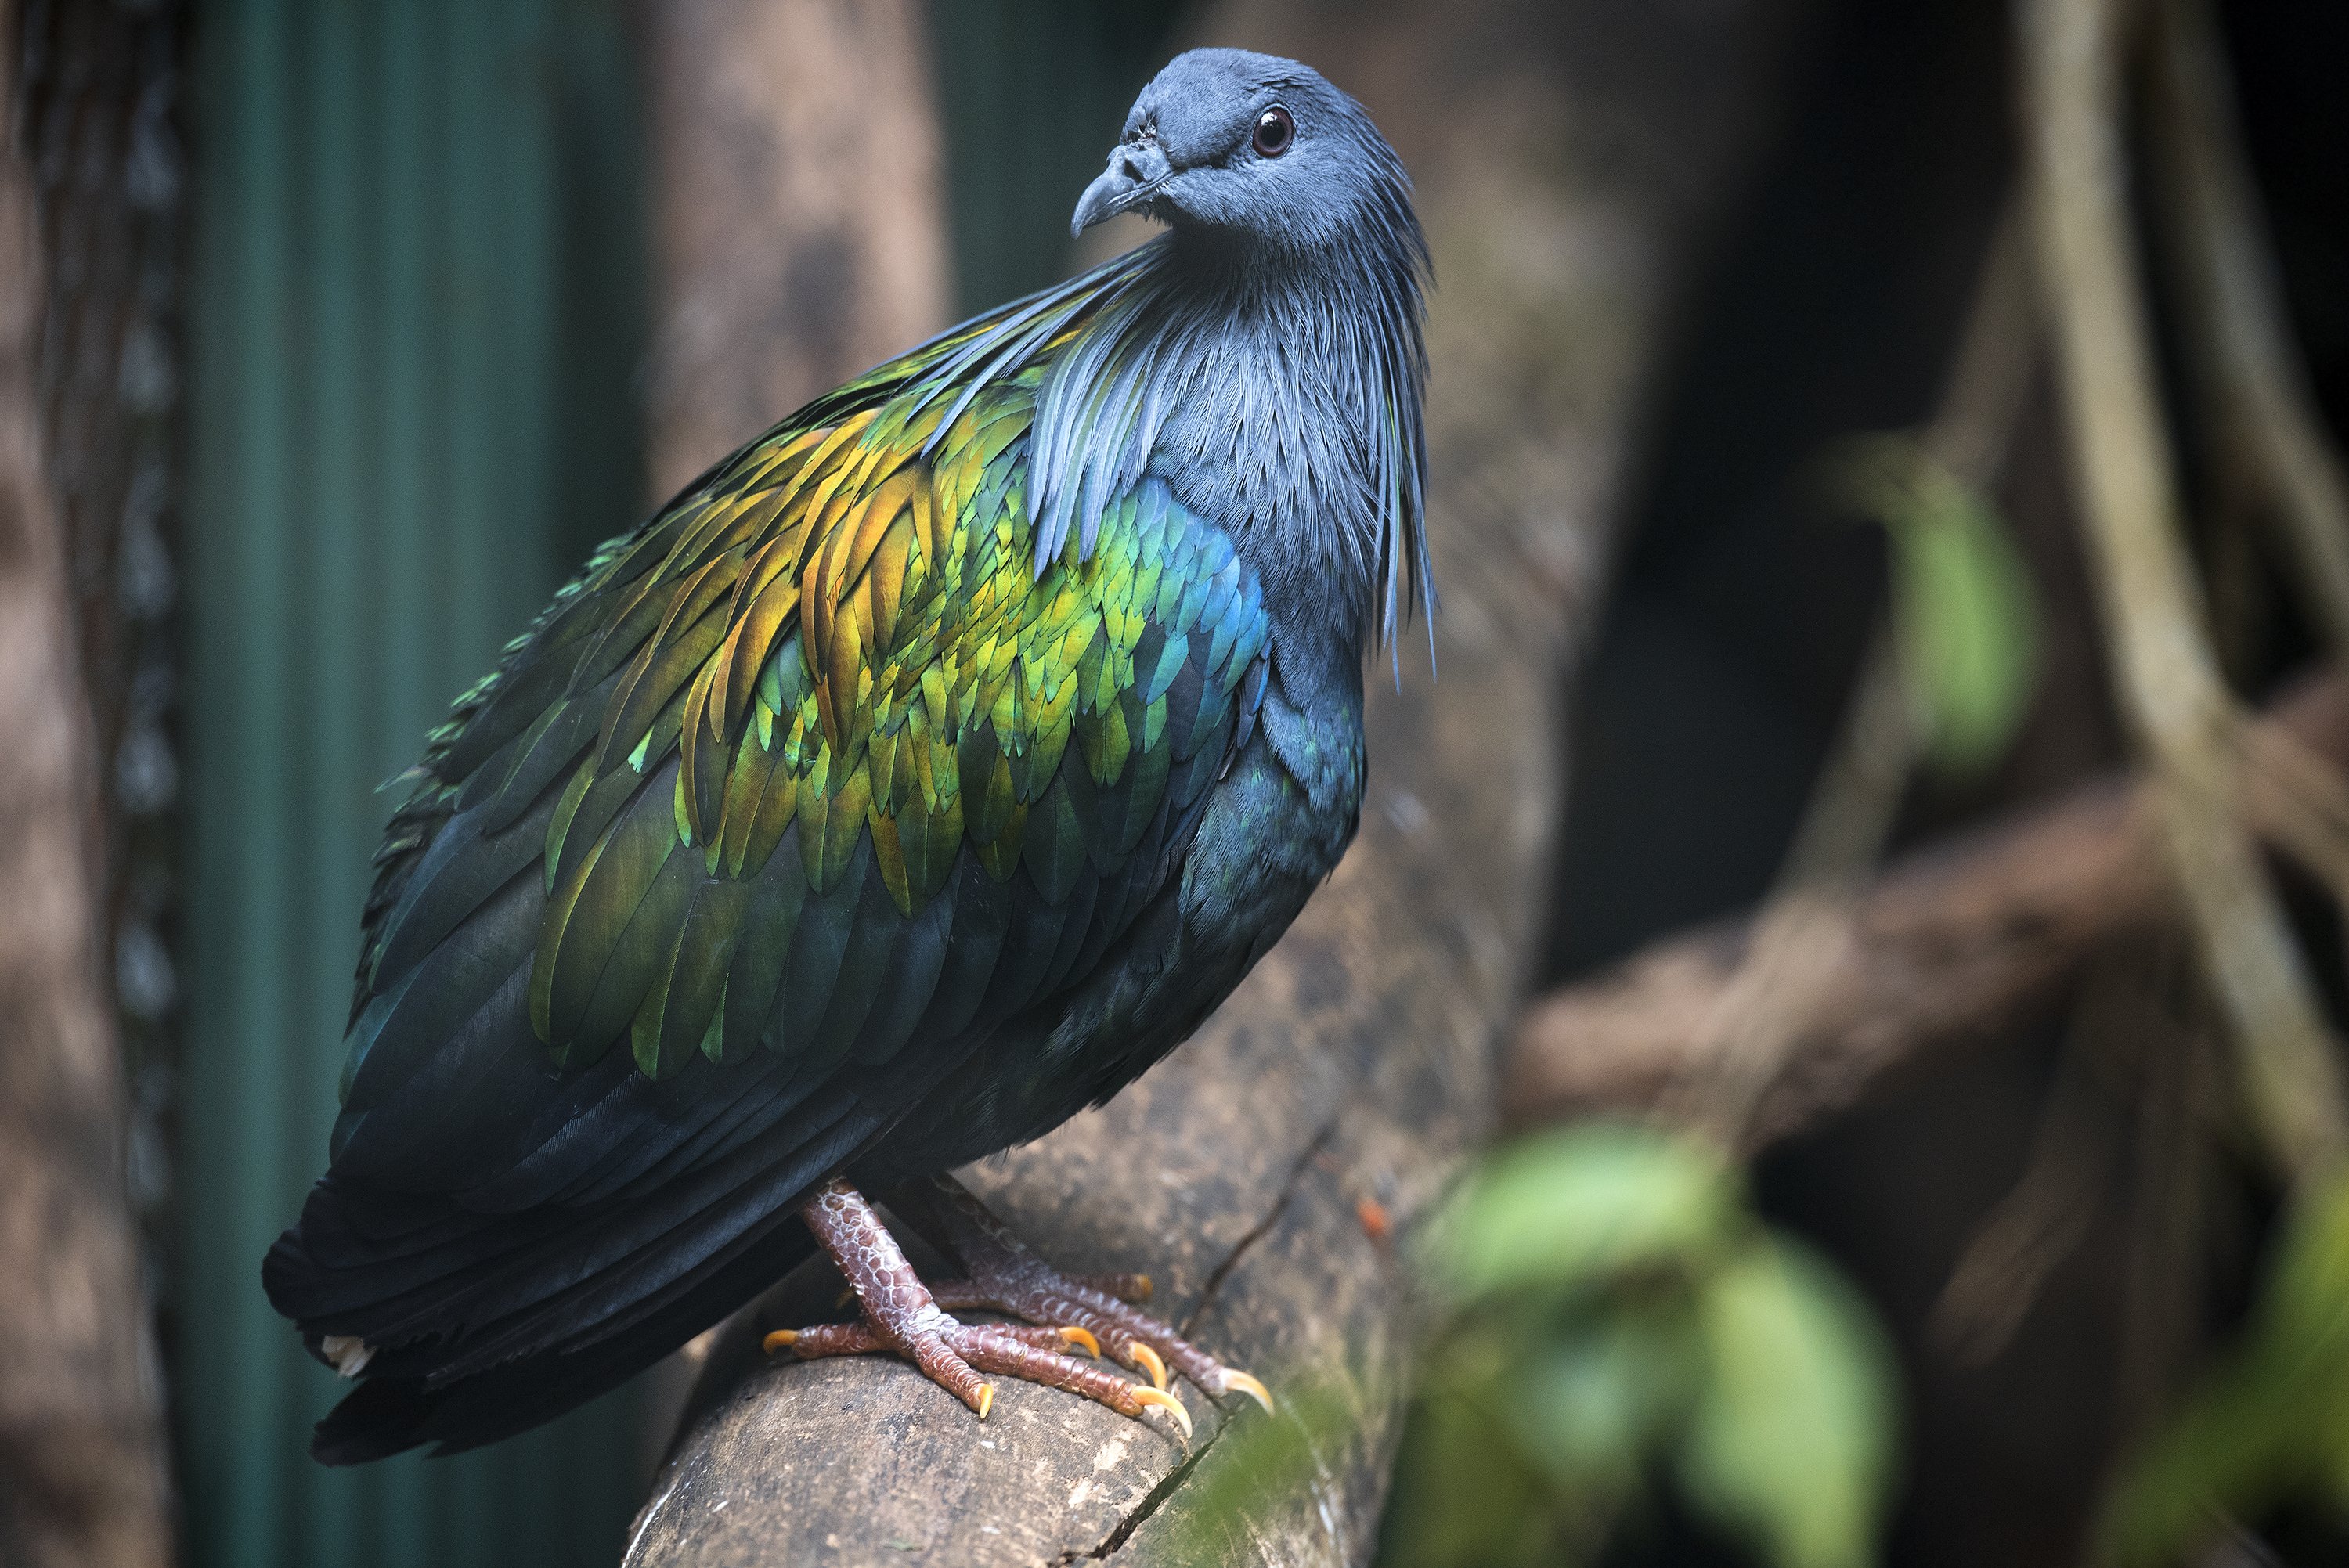 A Nicobar pigeon perched on top of a tree branch. | Source: Shutterstock